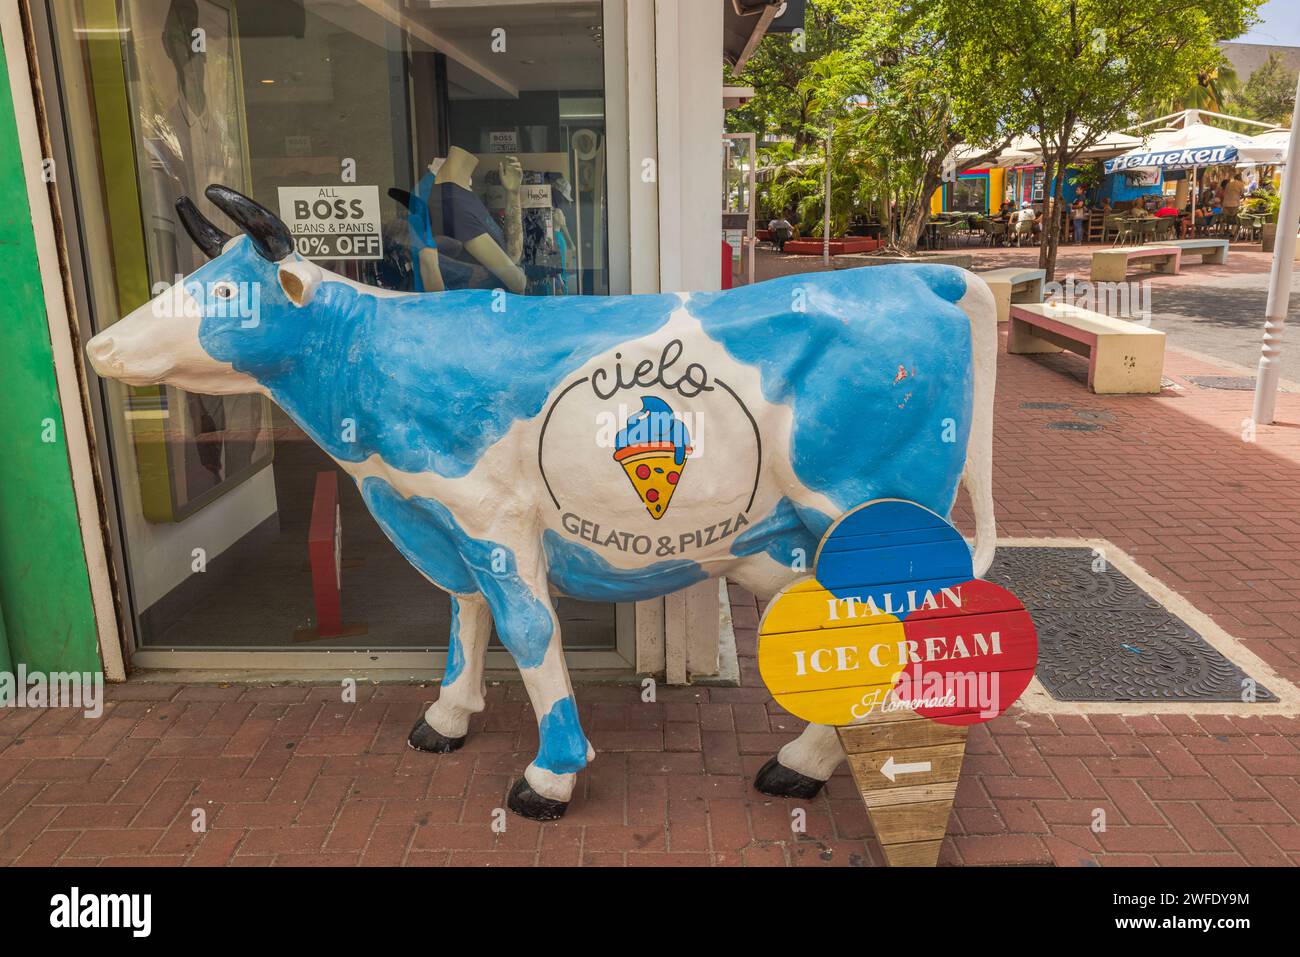 A statue of a white-and-blue cow near an ice cream shop window in downtown Willemstad, Curacao. Stock Photo